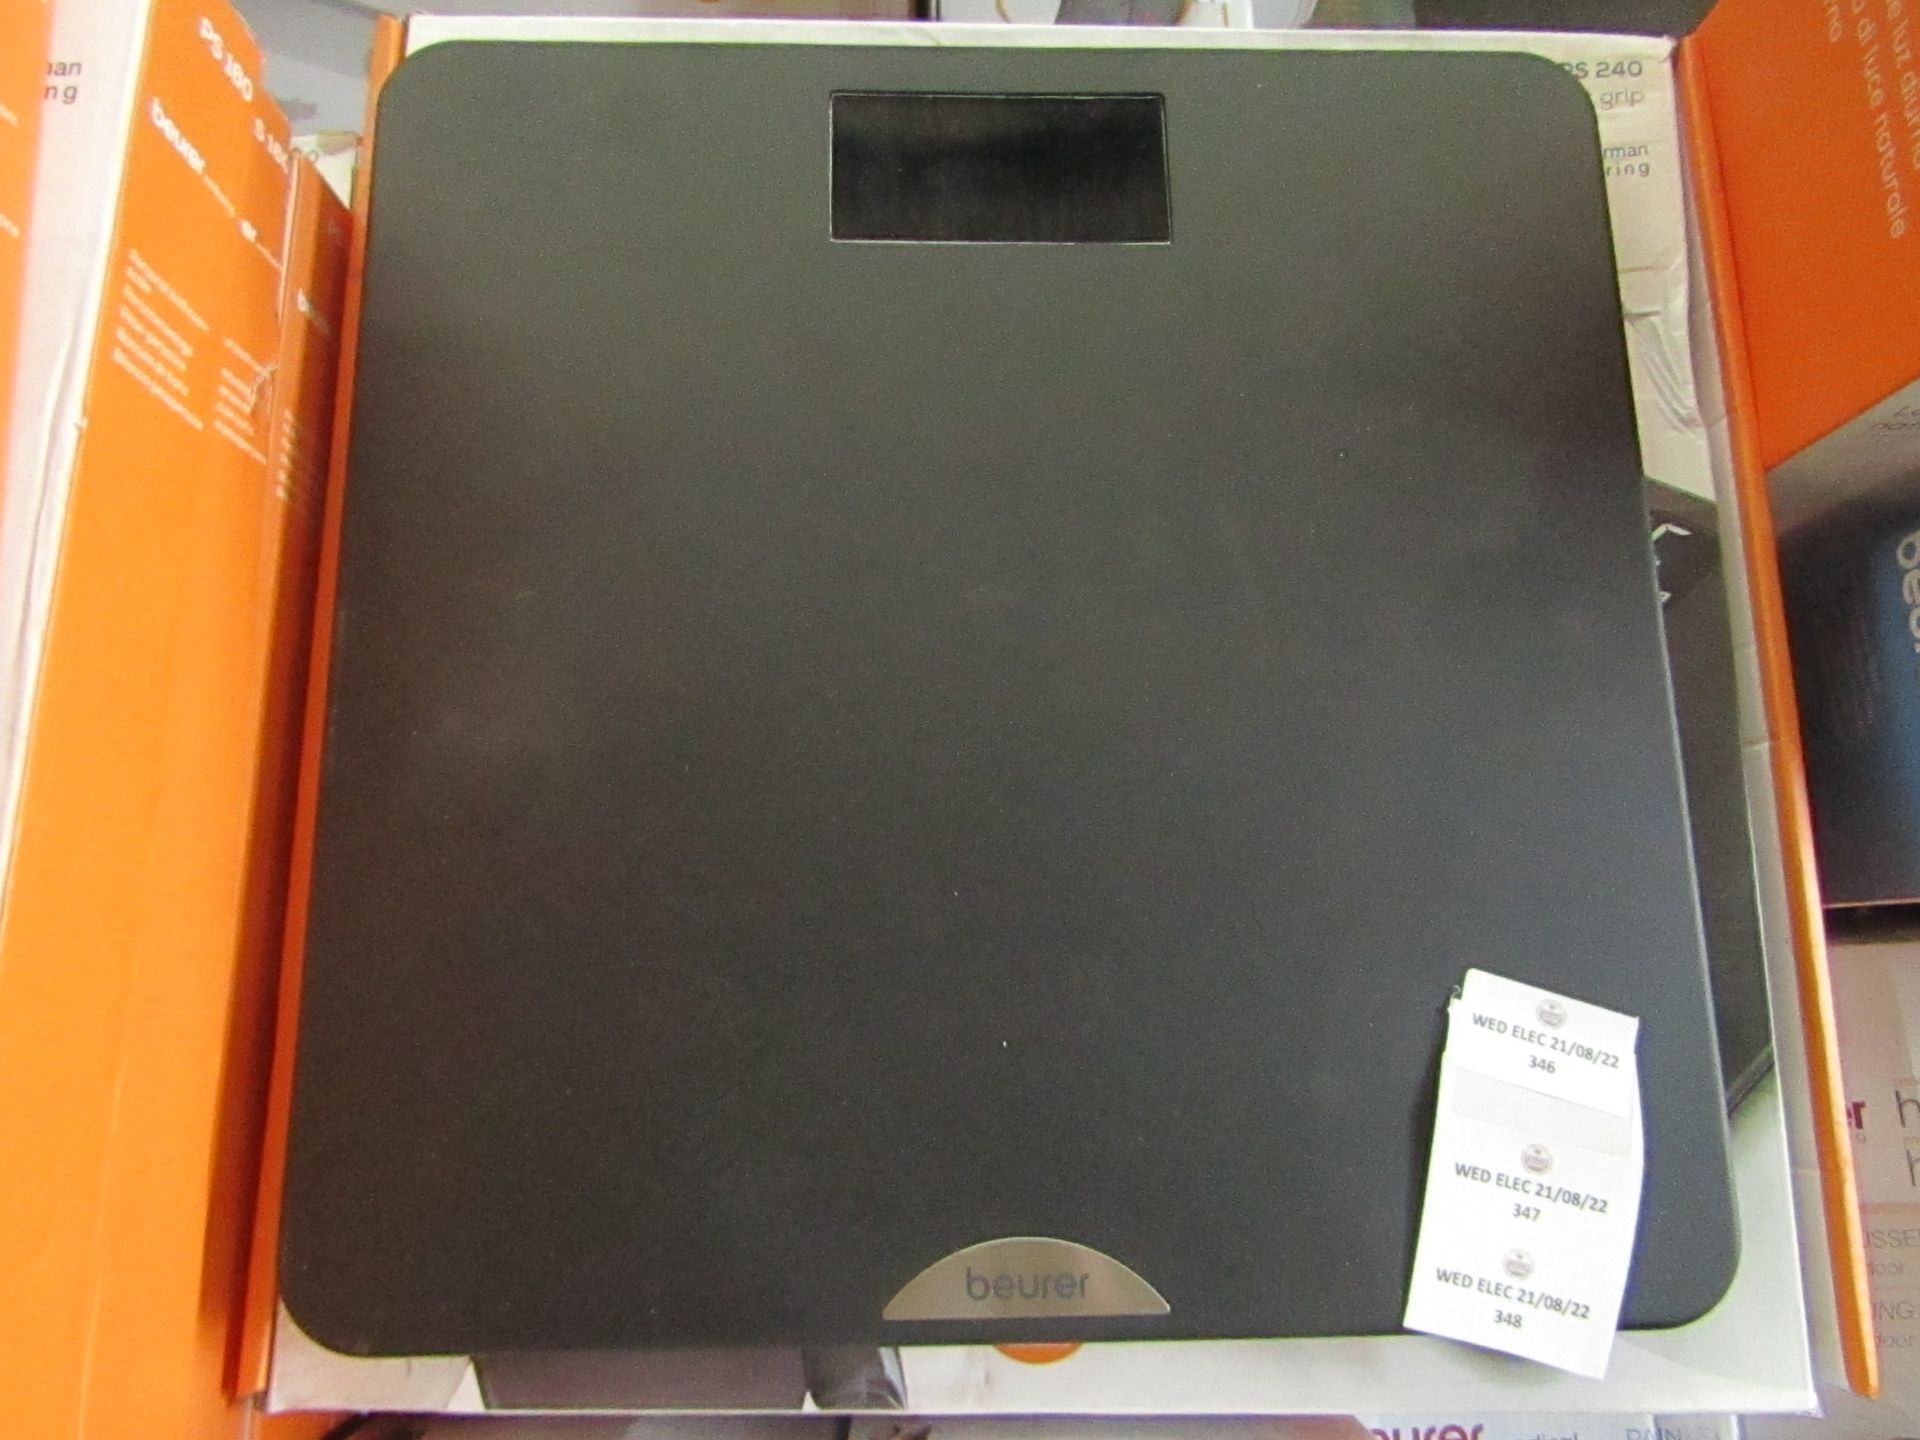 Beurer - Personal Soft Grip Bathroom Scale - PS240 - Grade B & Boxed. RRP £30.00 @Amazon.